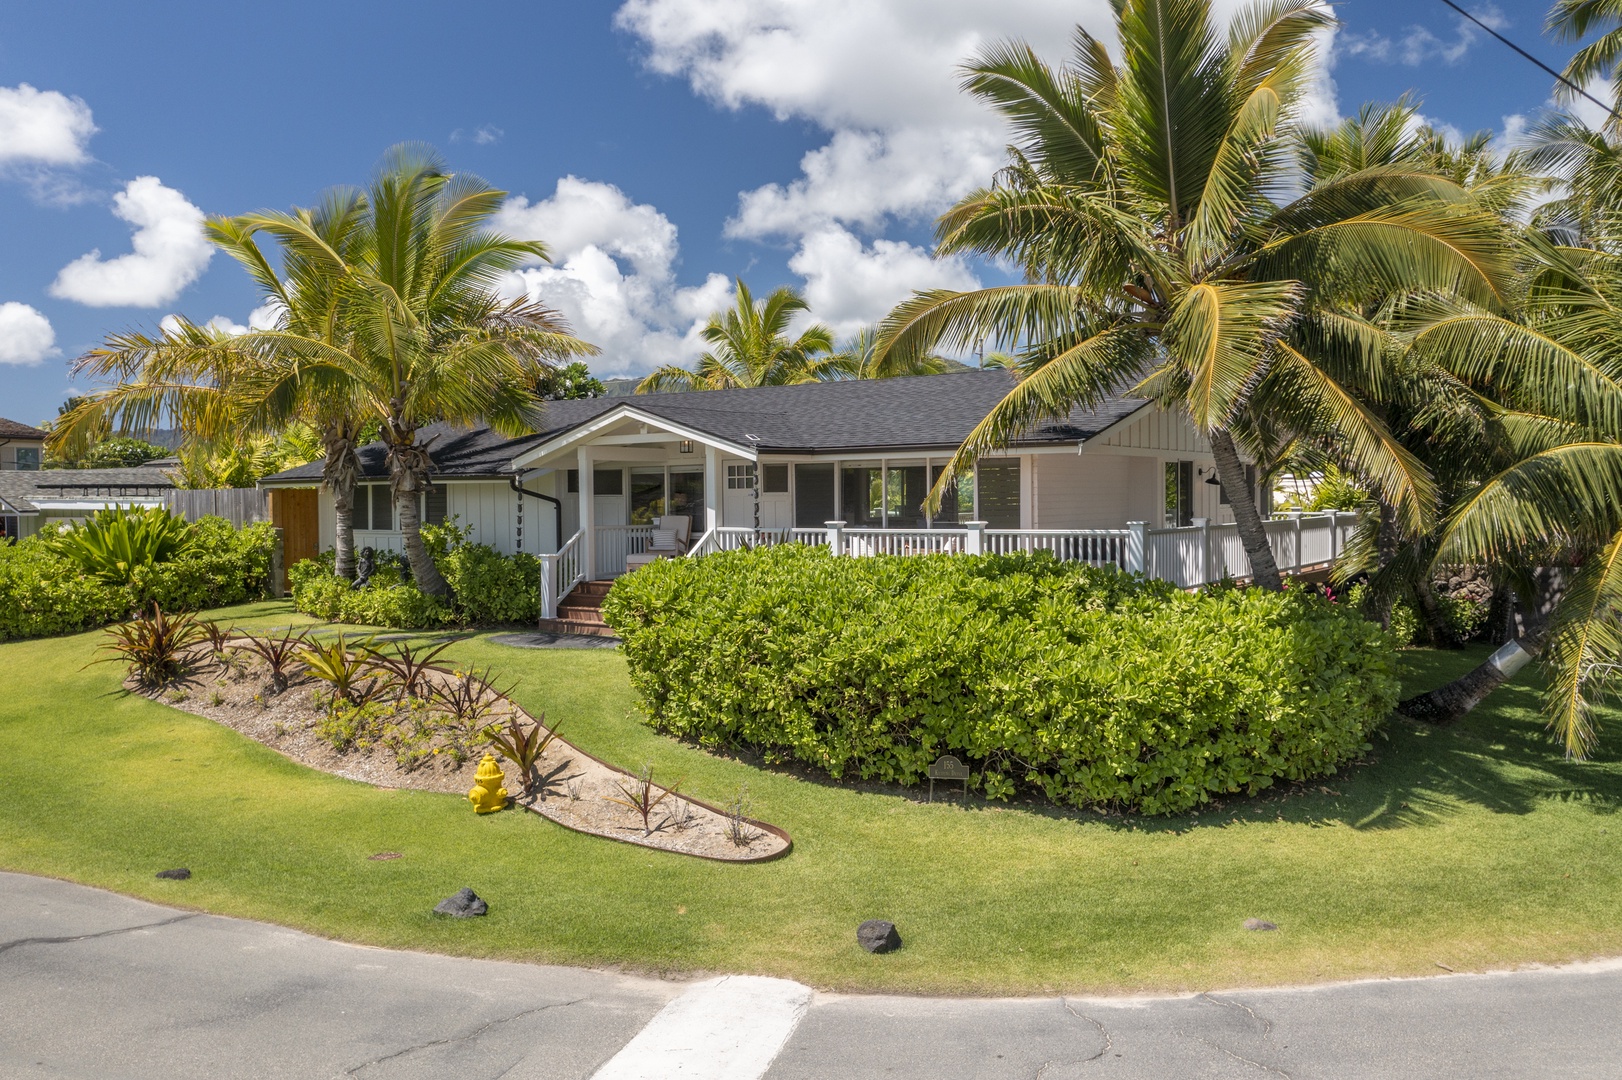 Kailua Vacation Rentals, Ranch Beach Estate - Charming home facade embraced by vibrant green foliage.